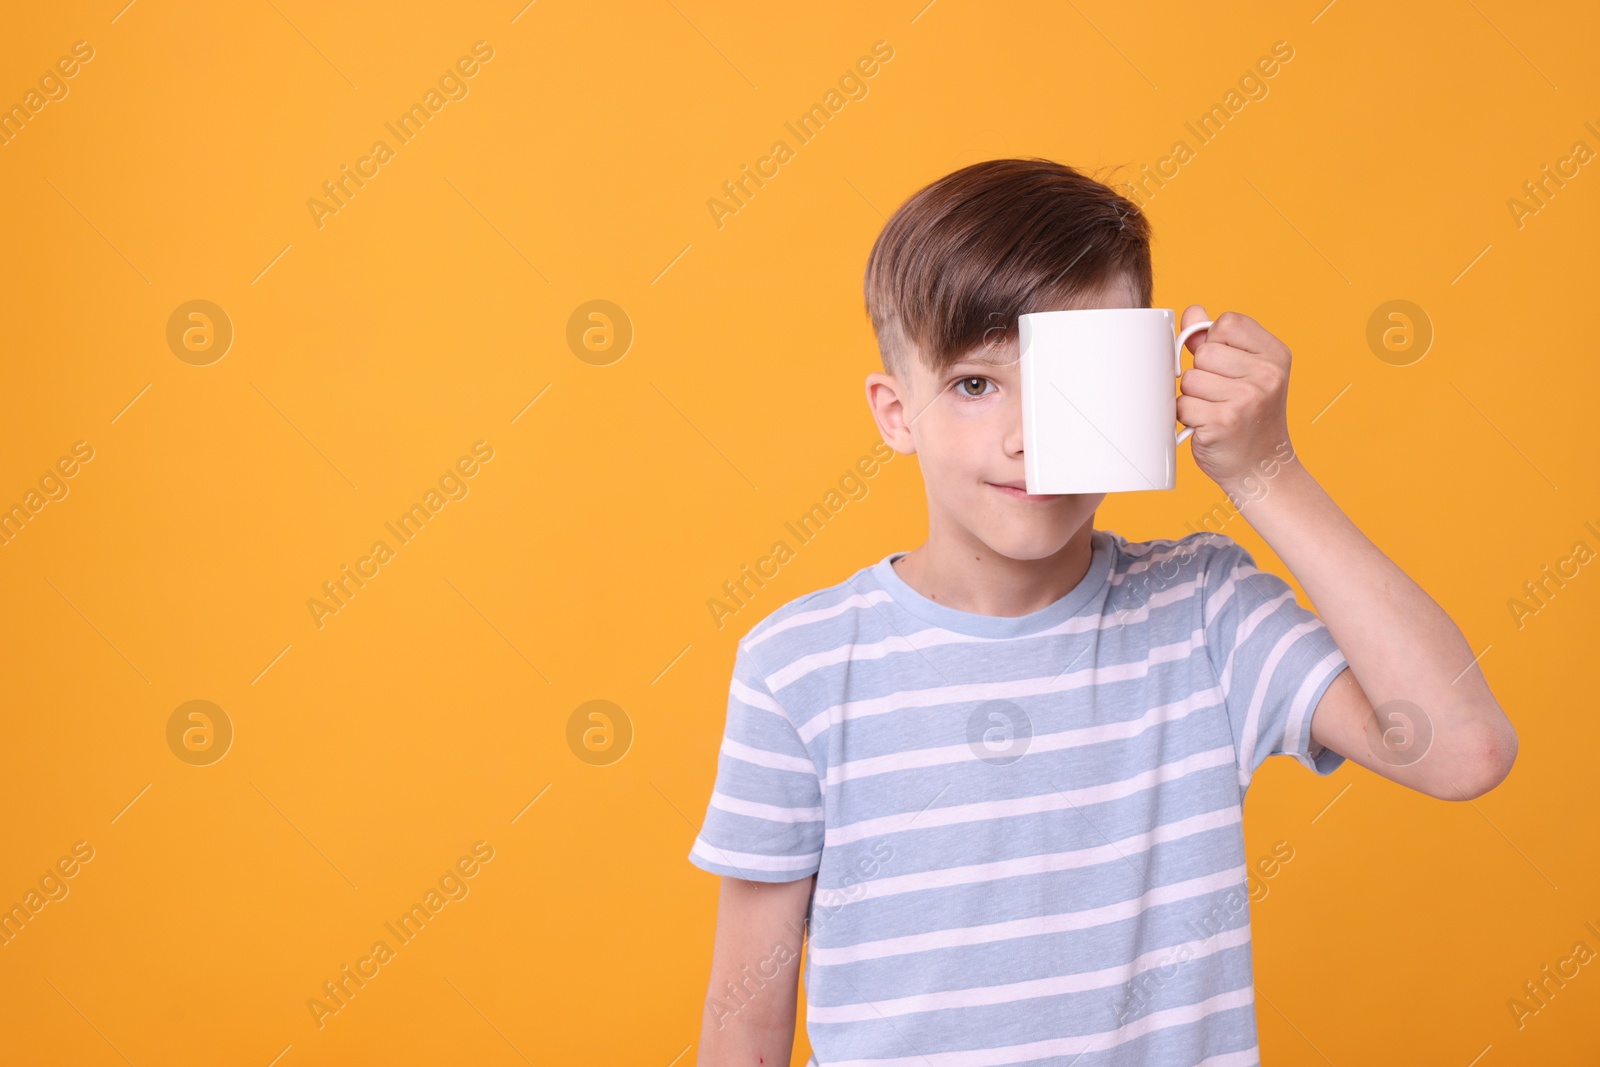 Photo of Cute boy covering eye with white ceramic mug on orange background, space for text